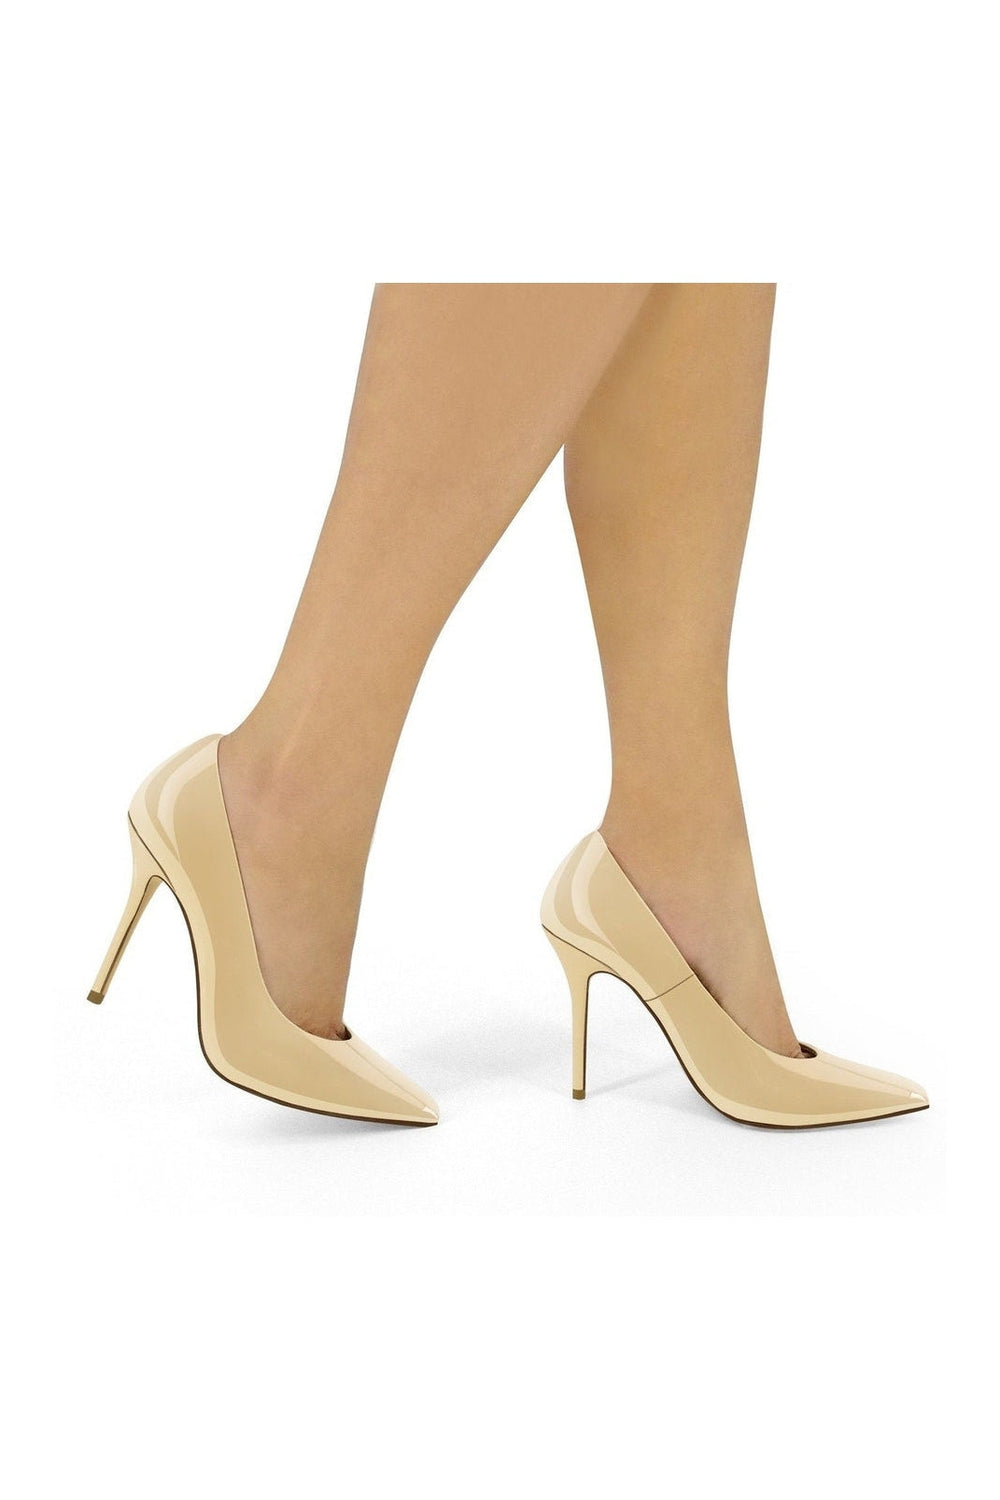 Super Sexy Classic Pump with Micro Stiletto Heel-Pumps-Sexyshoes Signature-Nude-SEXYSHOES.COM